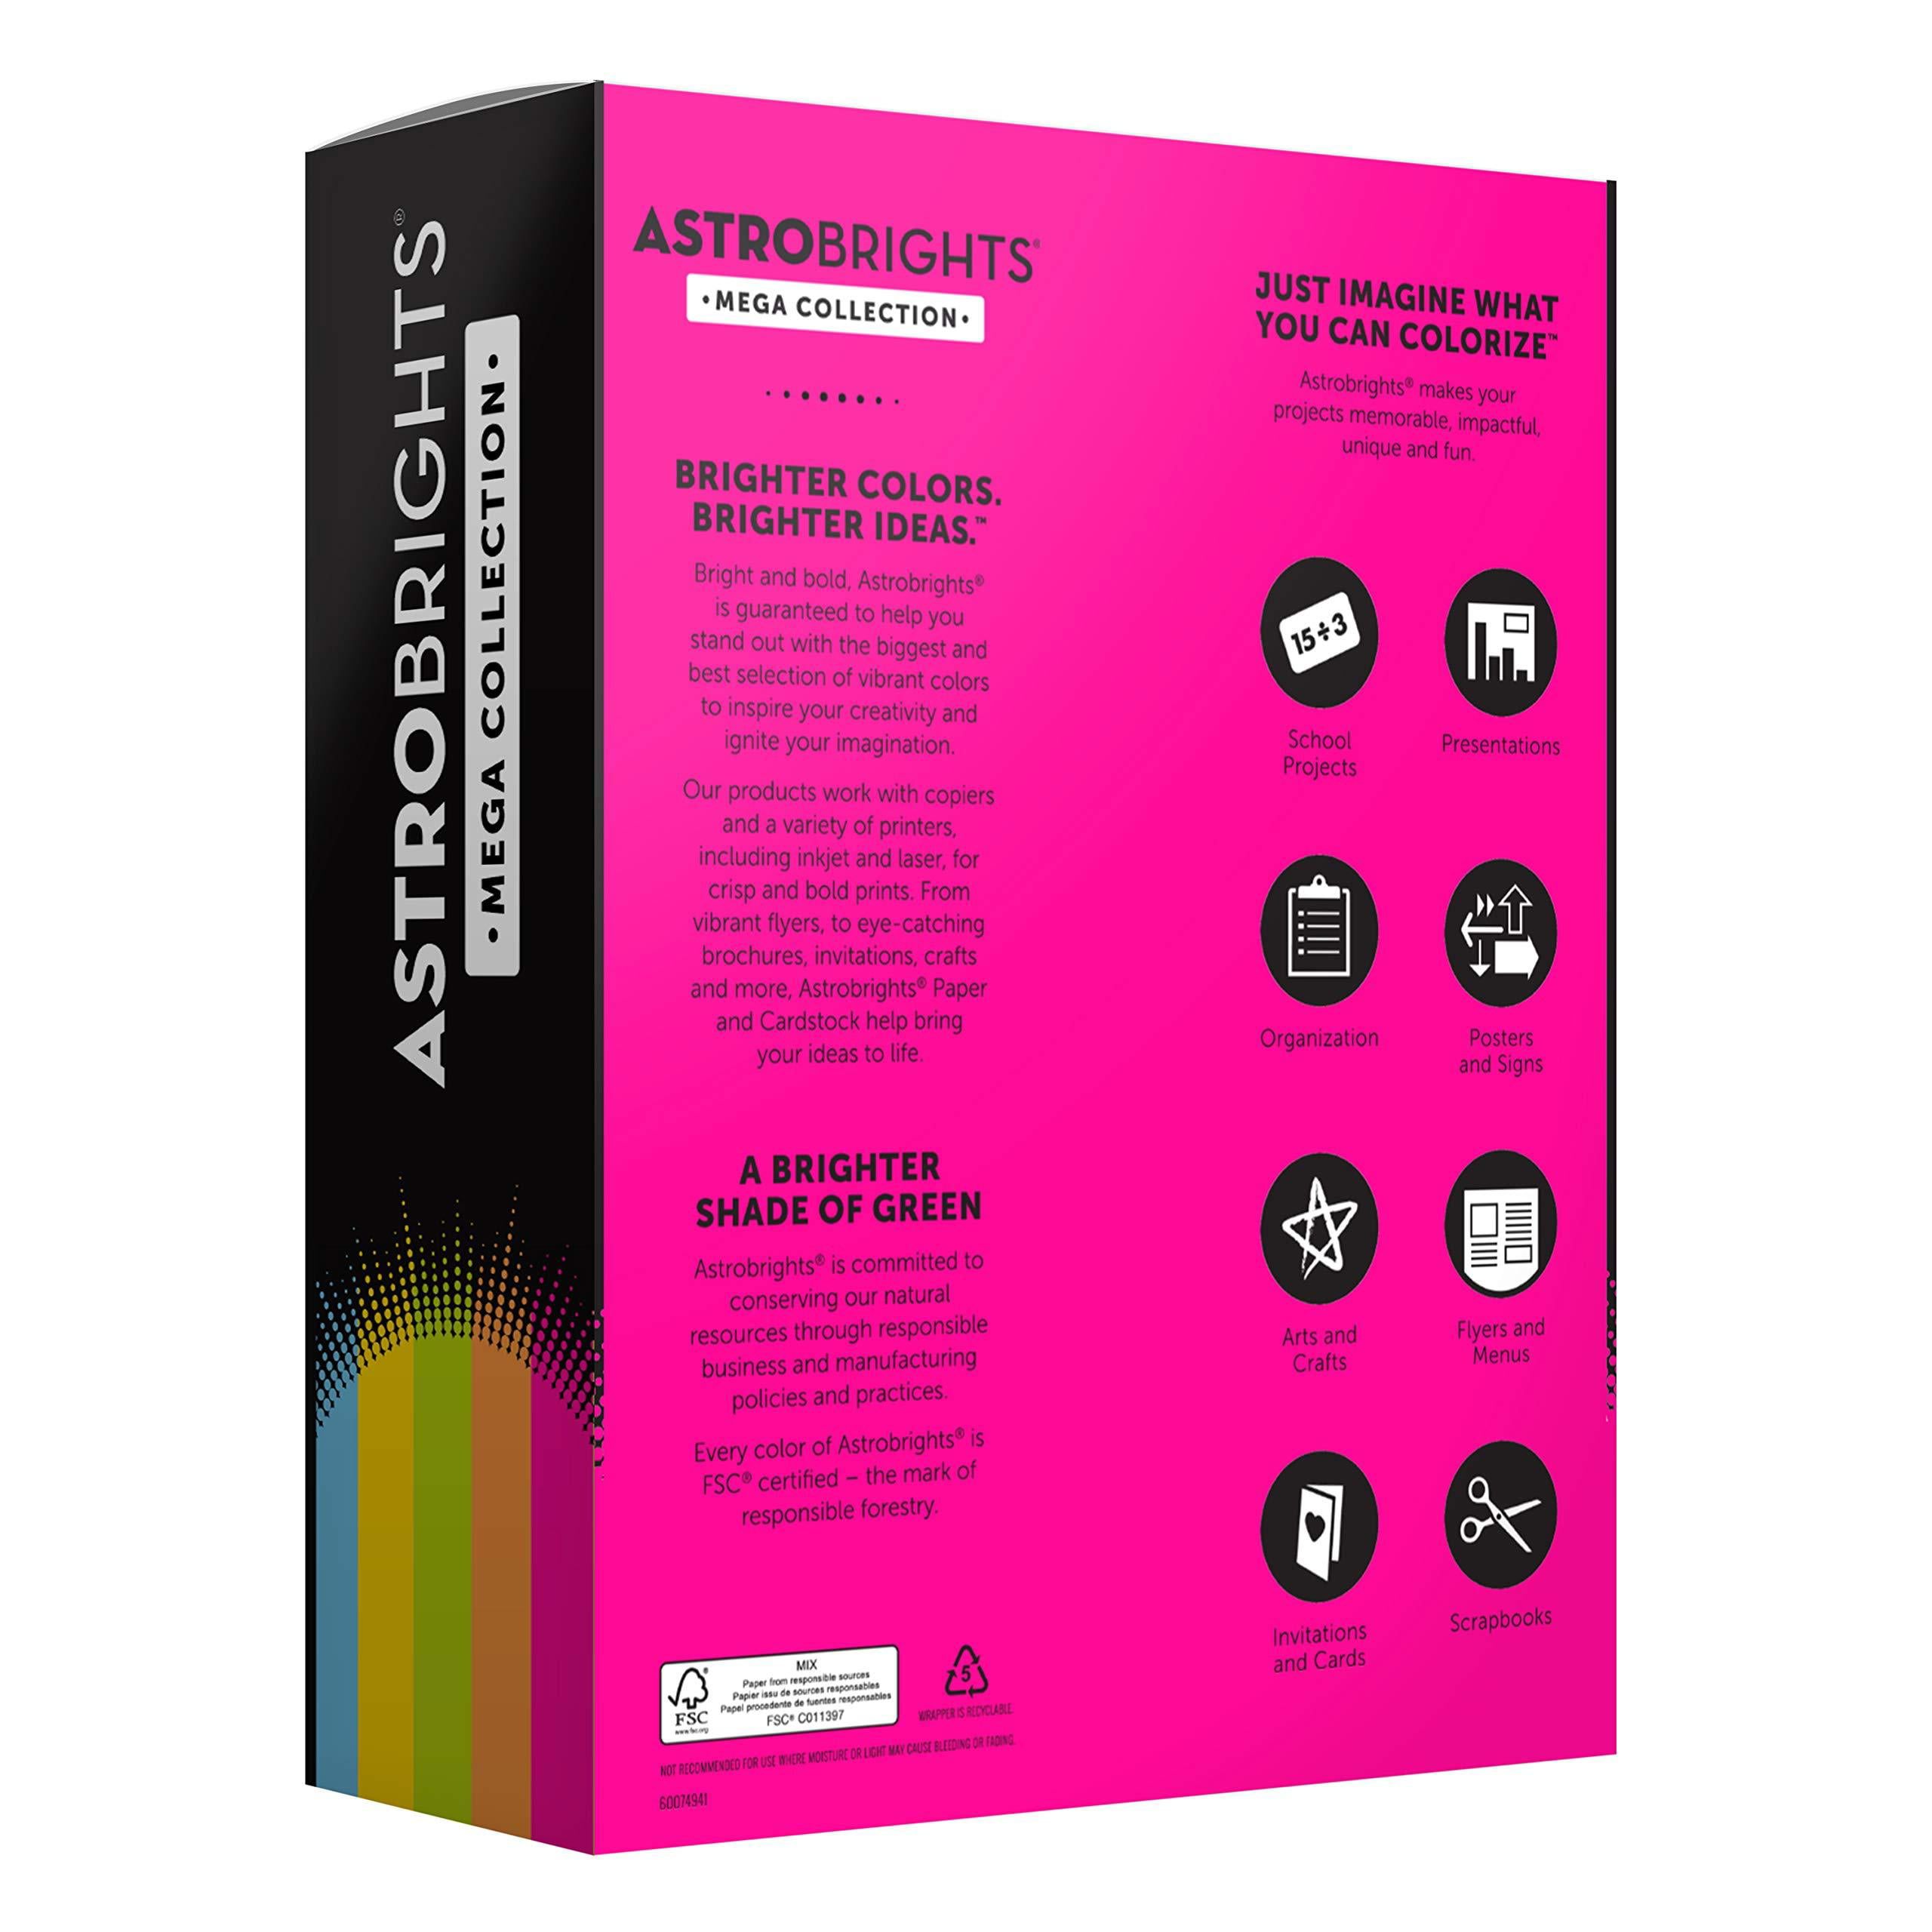 Astrobrights RNAB09Y681BML astrobrights mega collection, colored cardstock,  punchy pastel 5-color assortment, 320 sheets, 65 lb./176 gsm, 8.5 x 11 - m